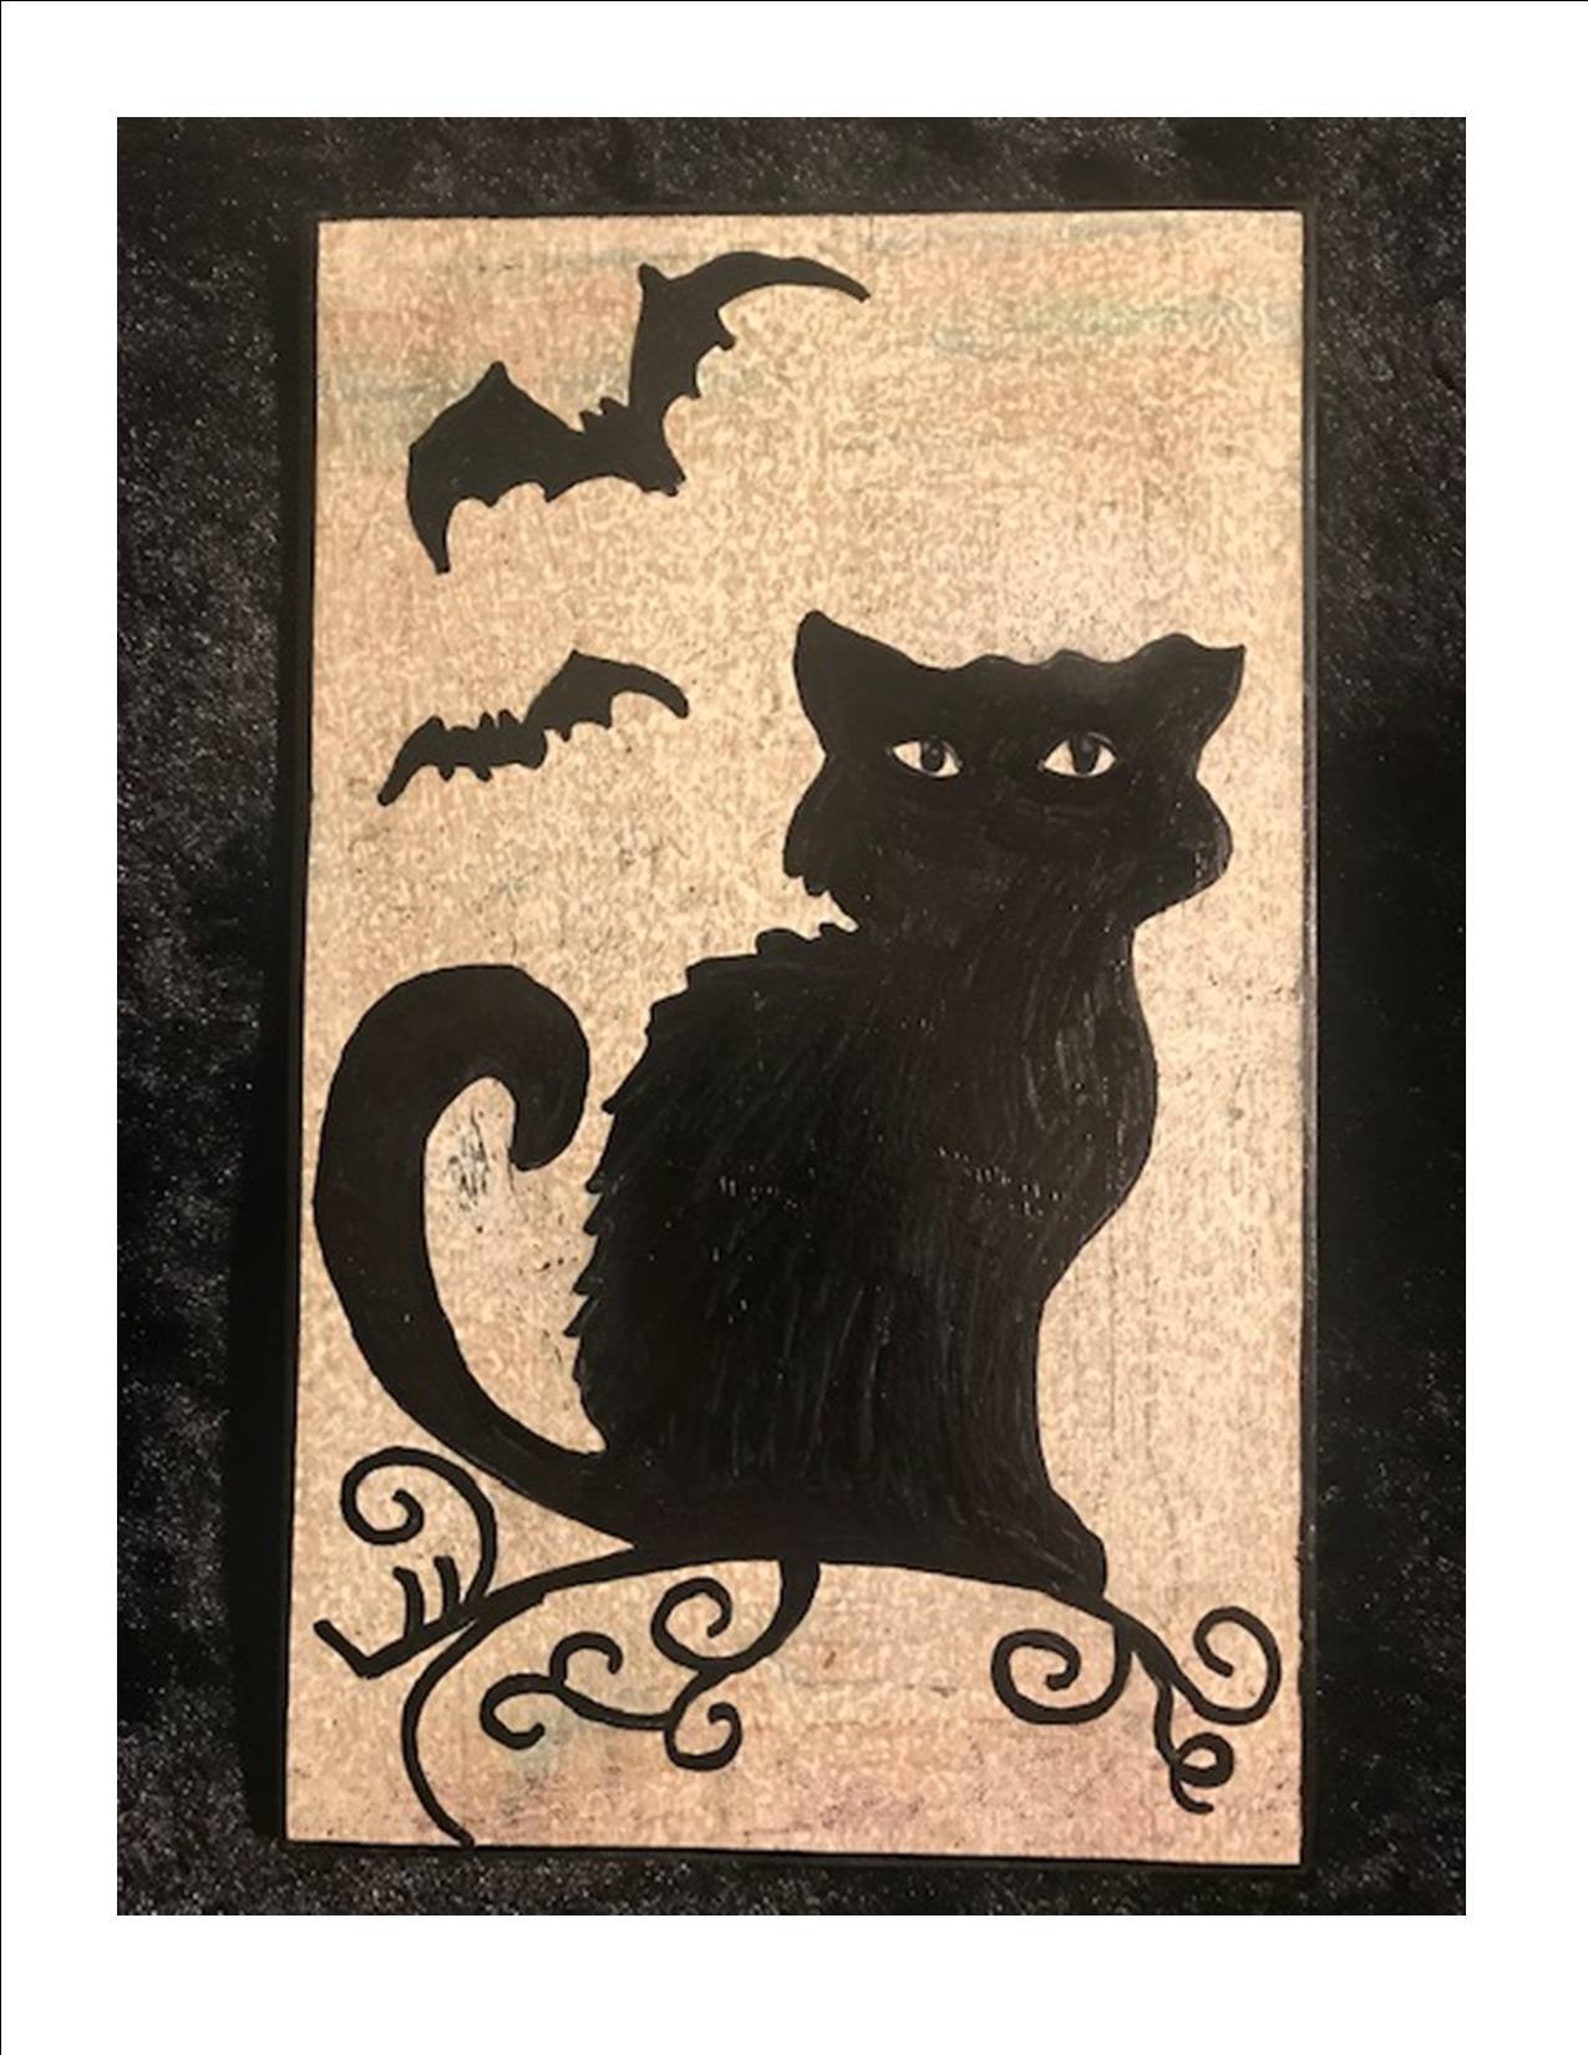 Black Cat  at Halloween Acrylic paint  on wood hand painted 